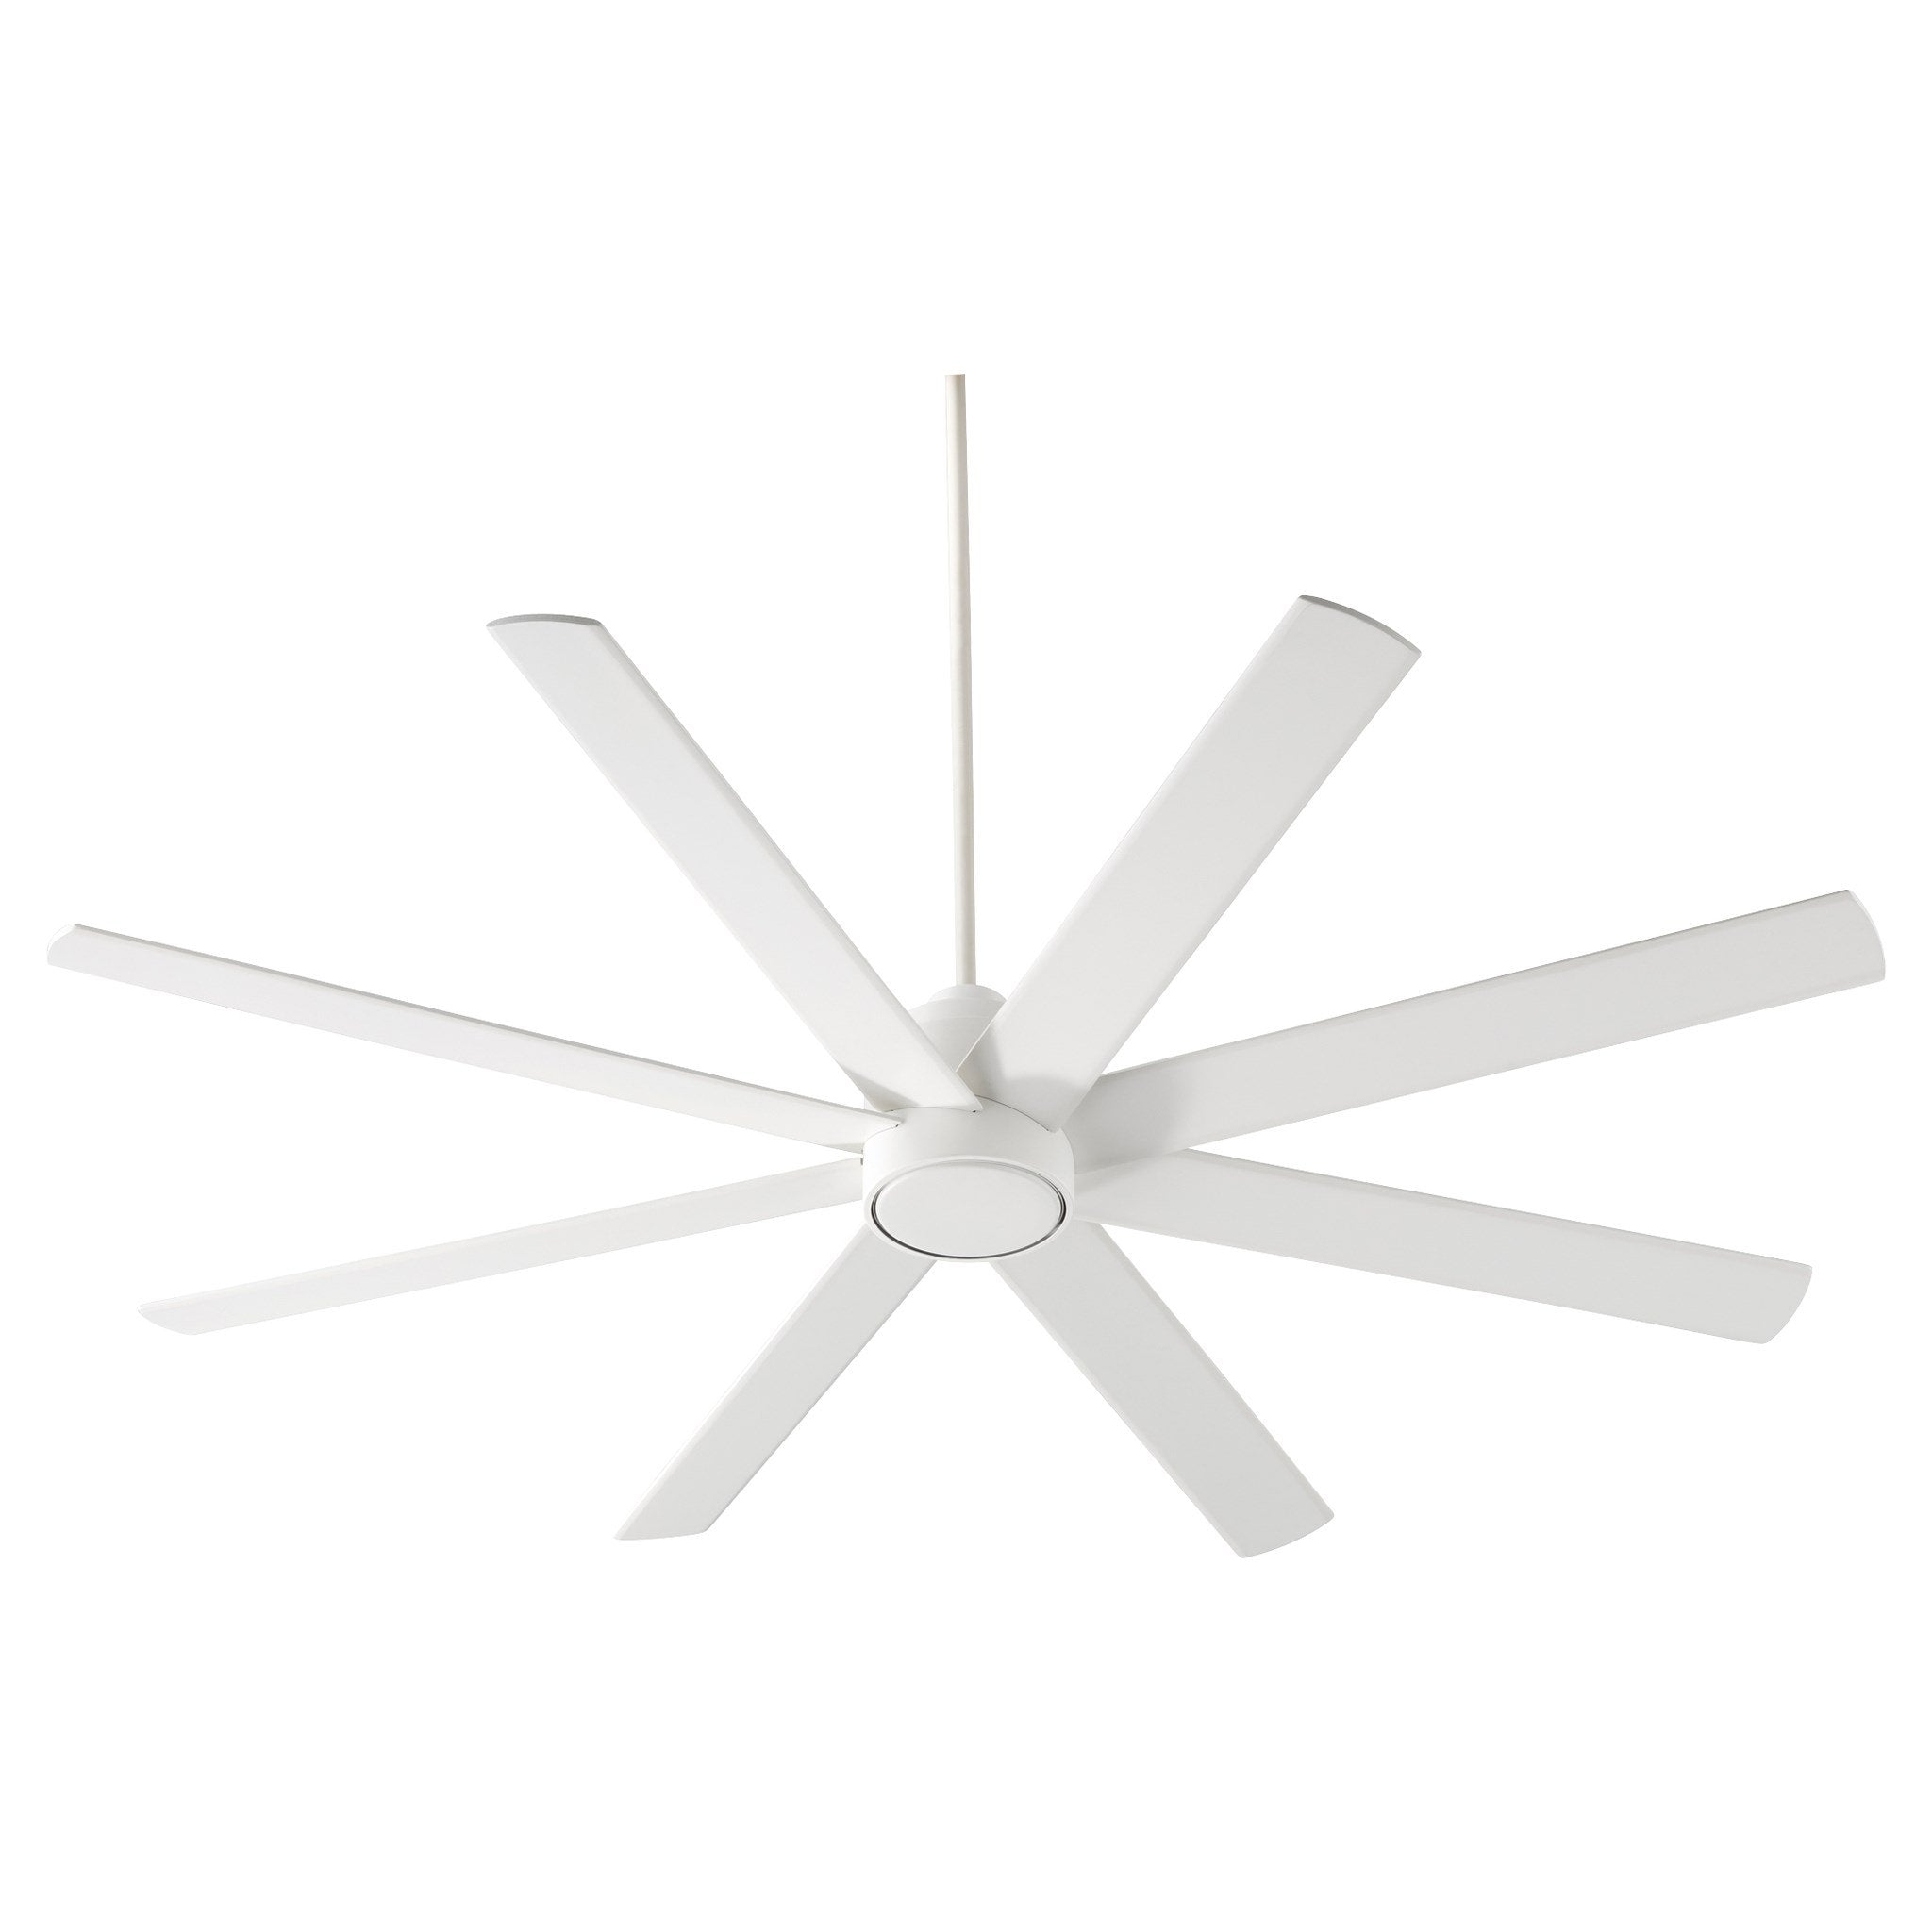 Oxygen Lighting 3-100-6 Cosmo Ceiling Fan 70 Inch 8 Blades - White